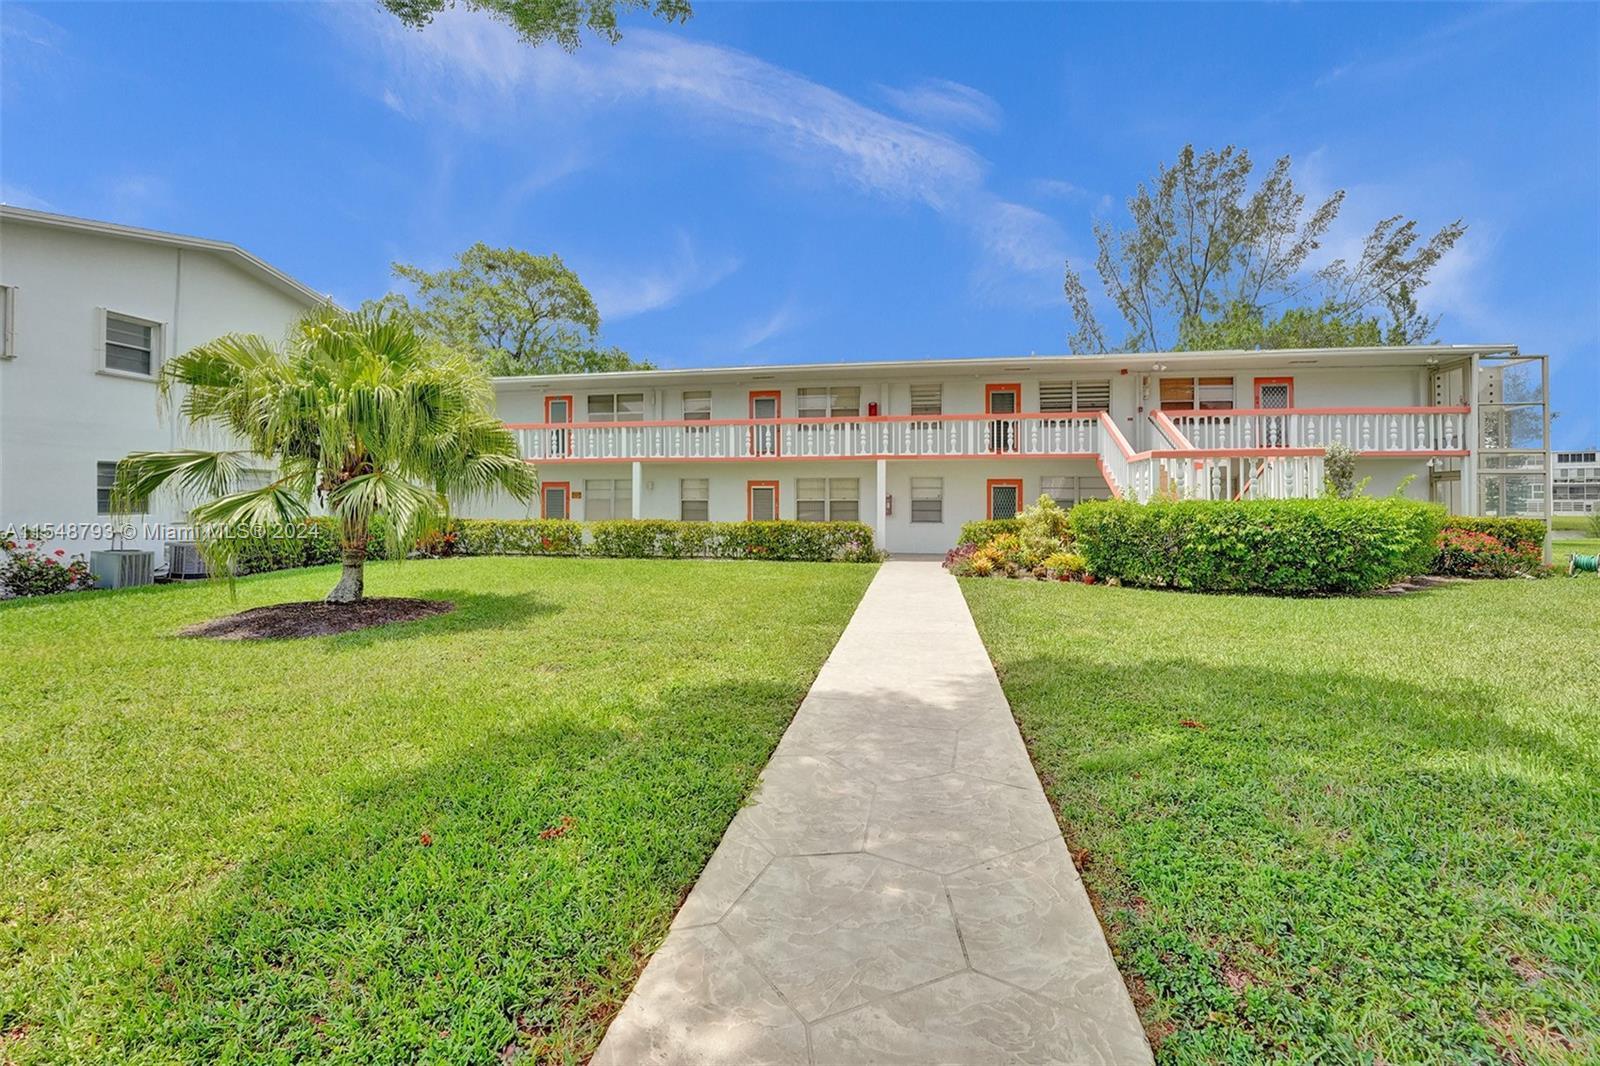 Welcome to this beautiful, ground-floor, sunny apartment located in Century Village Deerfield Beach,